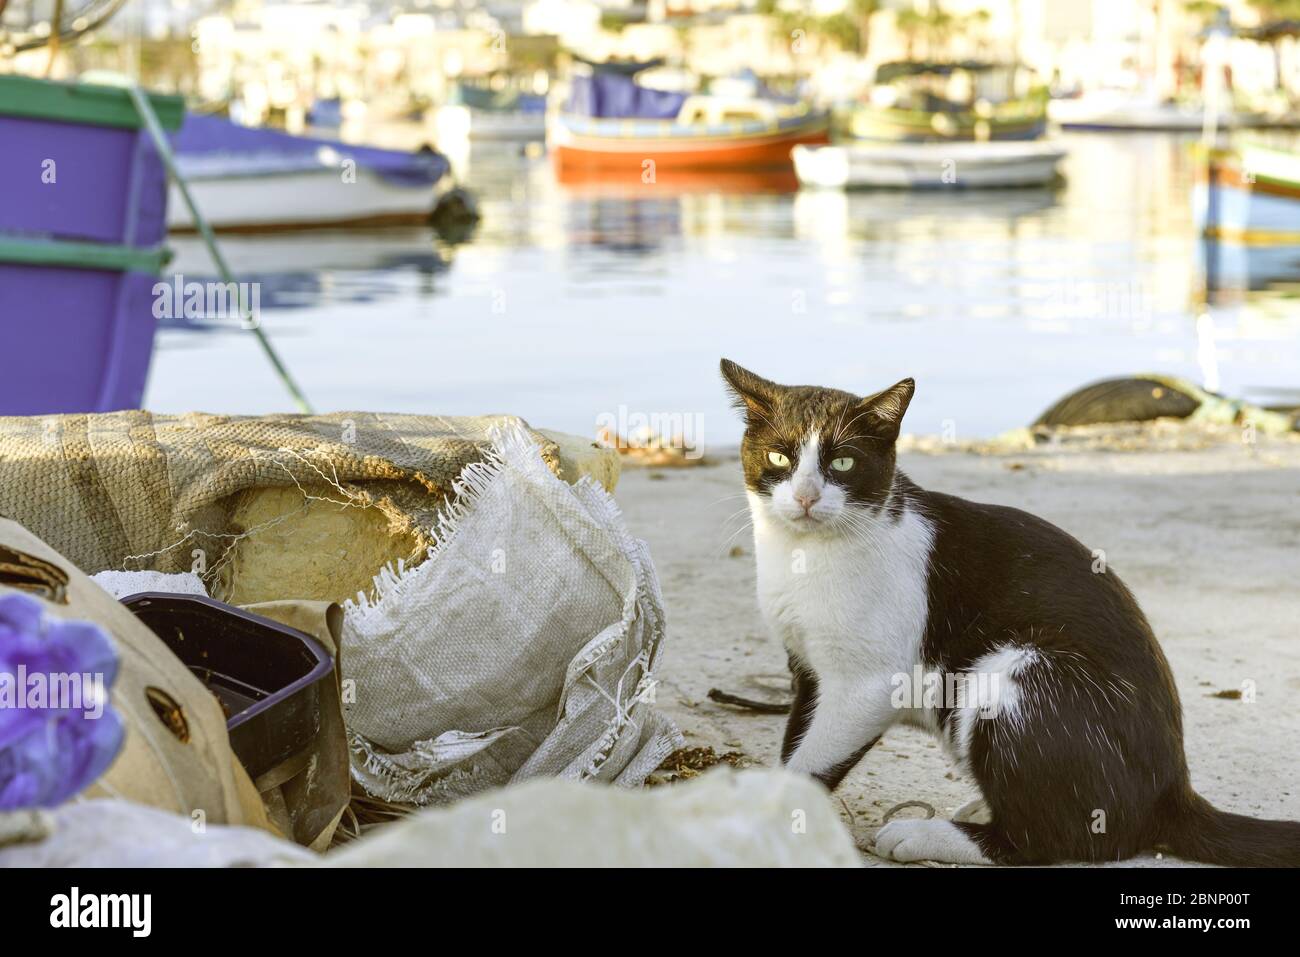 Male cat in the Mediterranean harbor, looking at the camera, colorful fishing boats in the background Stock Photo